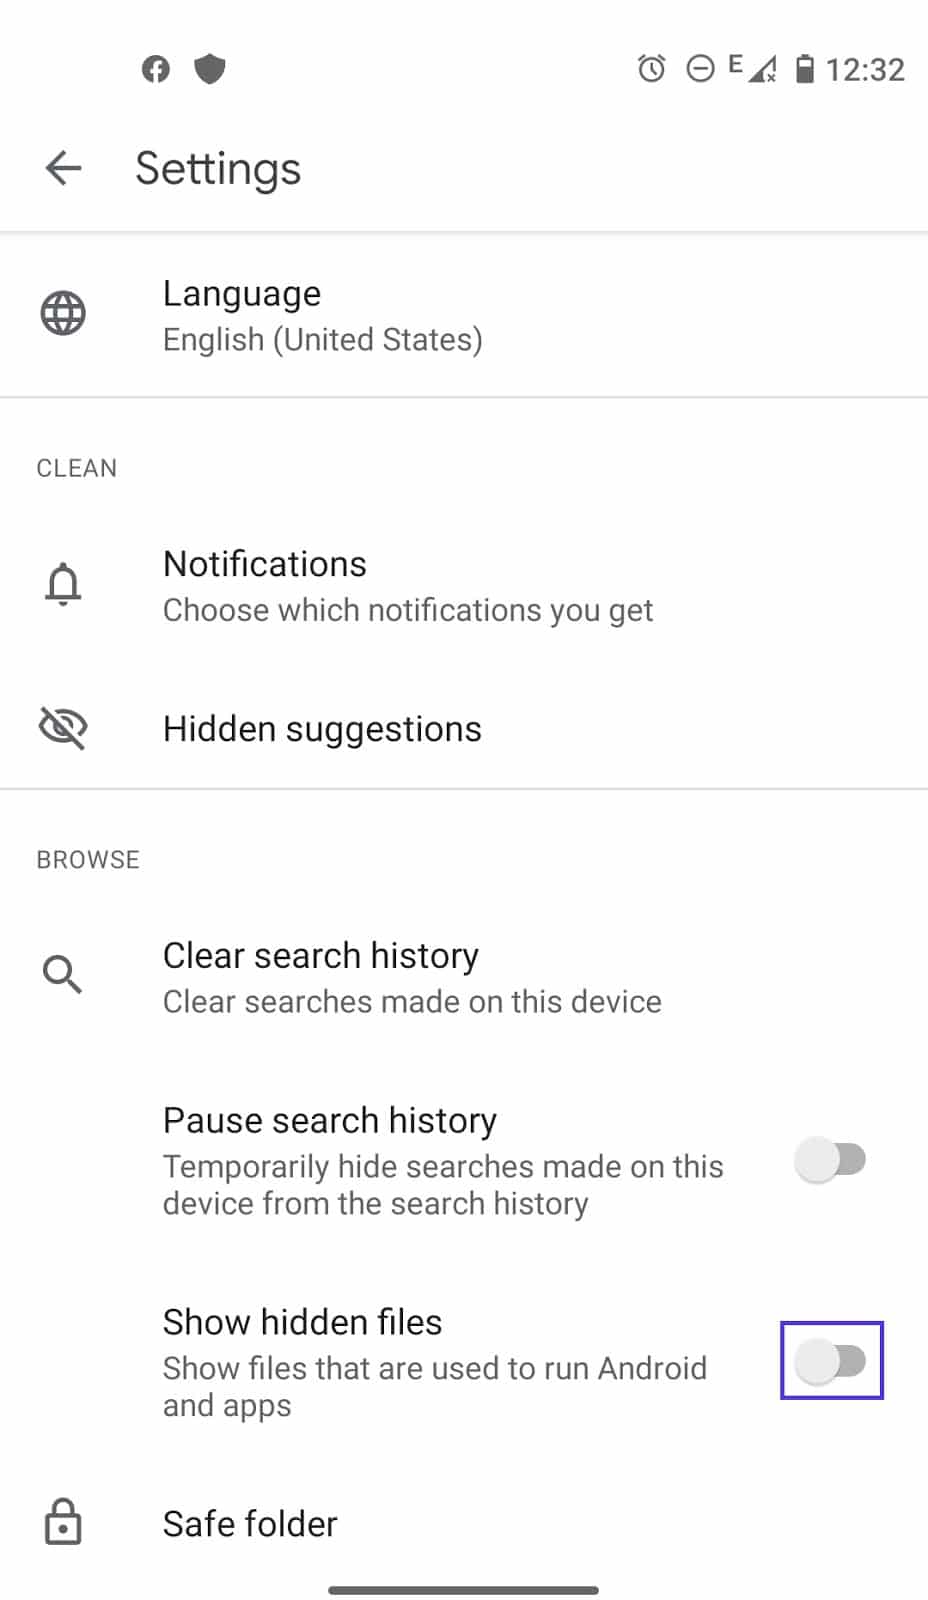 Android Files with “Show hidden files” toggle button.